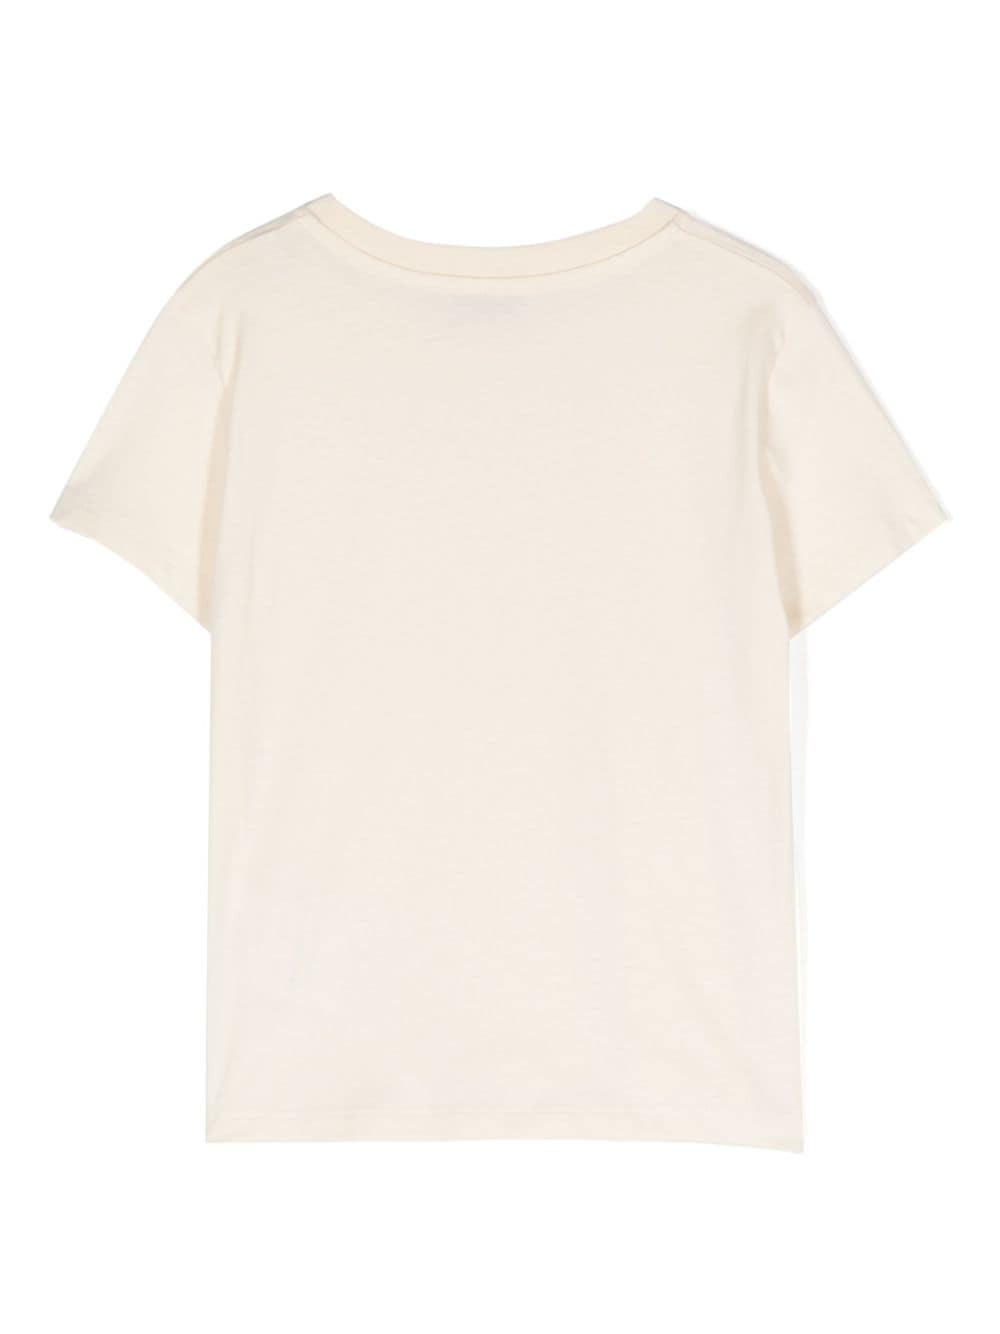 Cream t-shirt for girls with logo